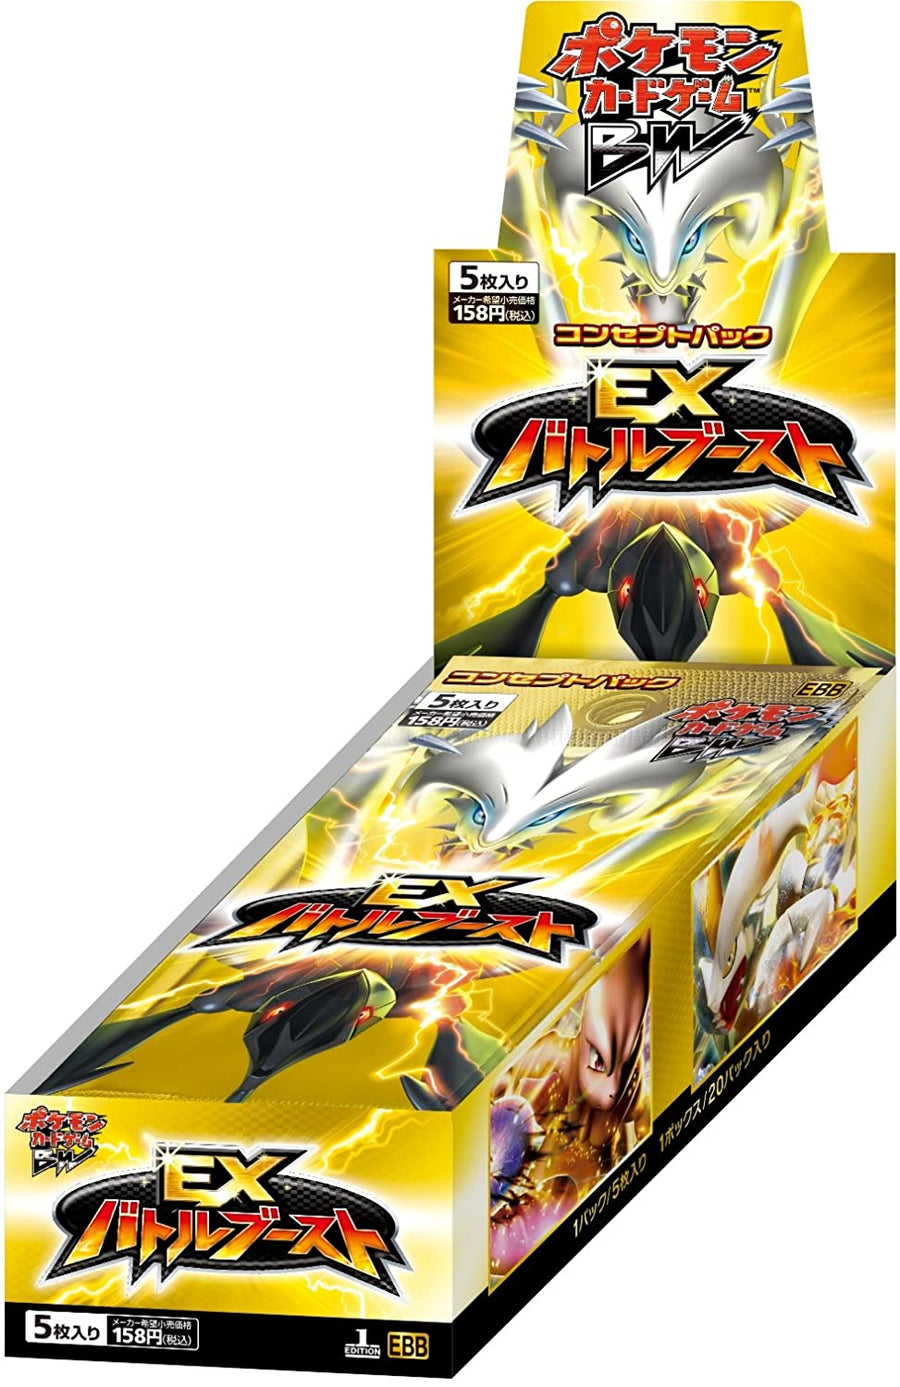 Pokemon Trading Card Game - BW - Concept Pack - EX Battle Boost Booster Box - Japanese Ver. (Pokemon)